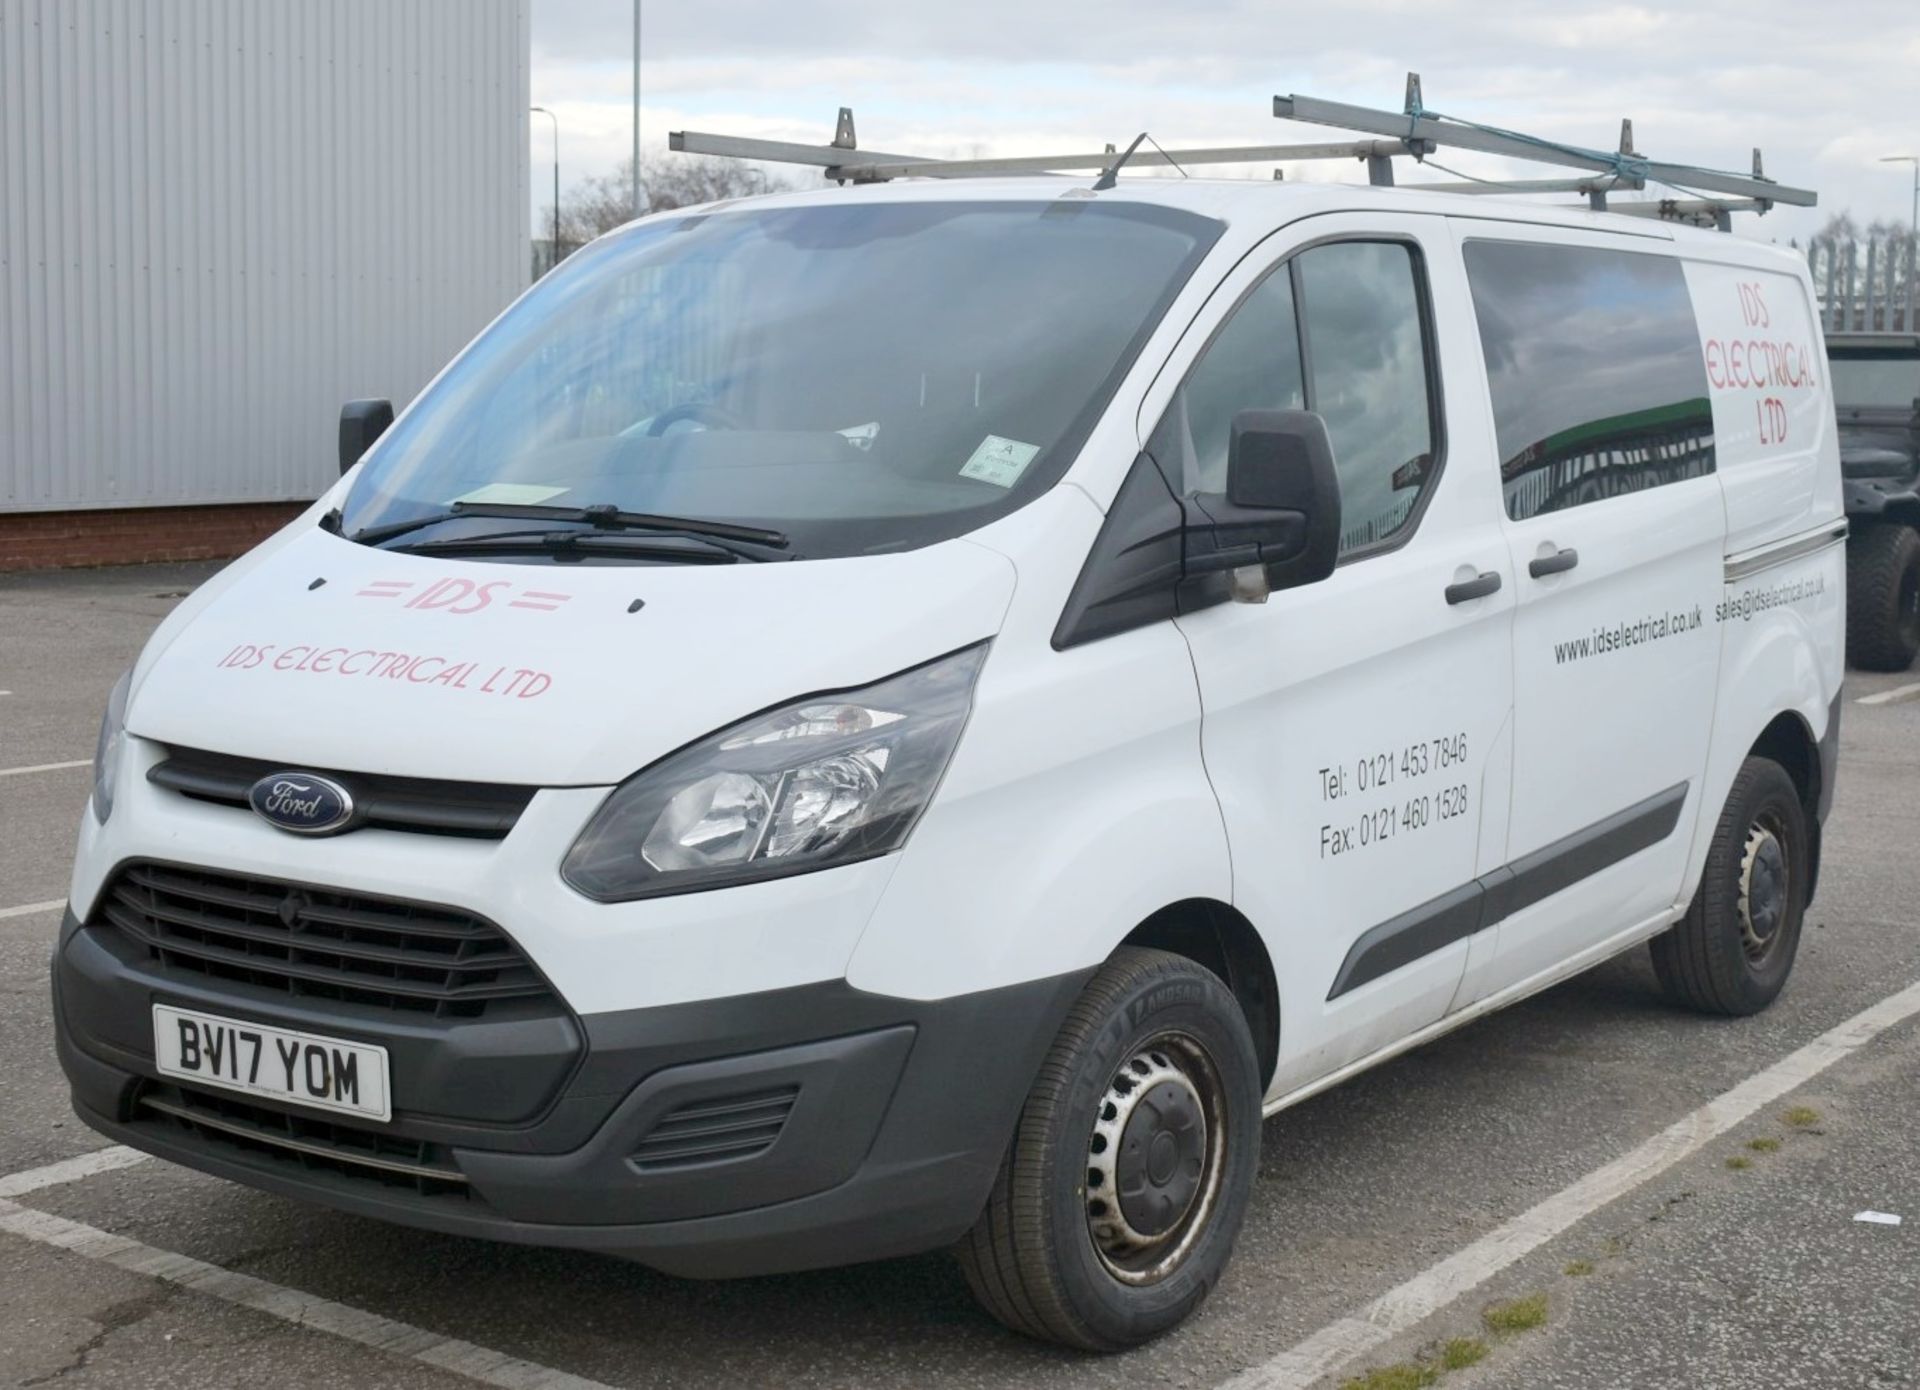 1 x Ford Transit 5 Seat Crew Van - Year 2017 - 12 Months MOT - Includes V5 and Key - Image 24 of 34